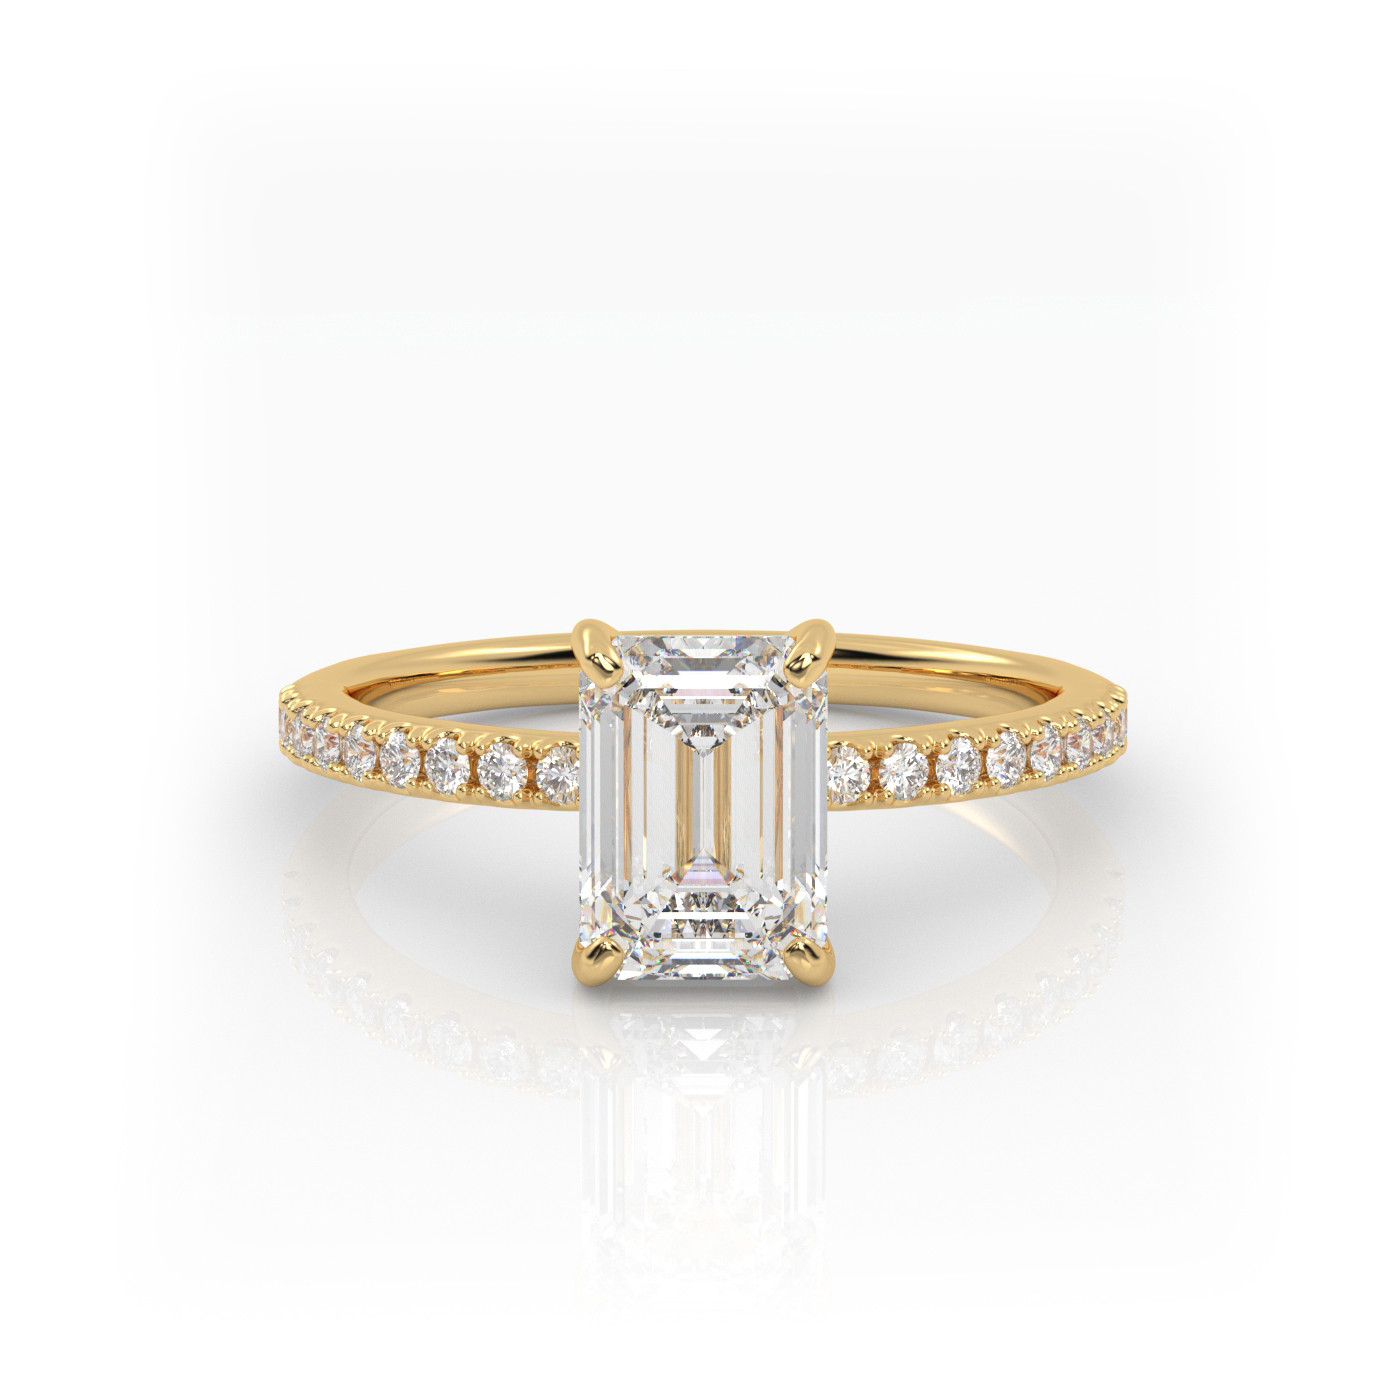 18K YELLOW GOLD Emerald Diamond Cut Solitaire Engagement Ring with Pave Band